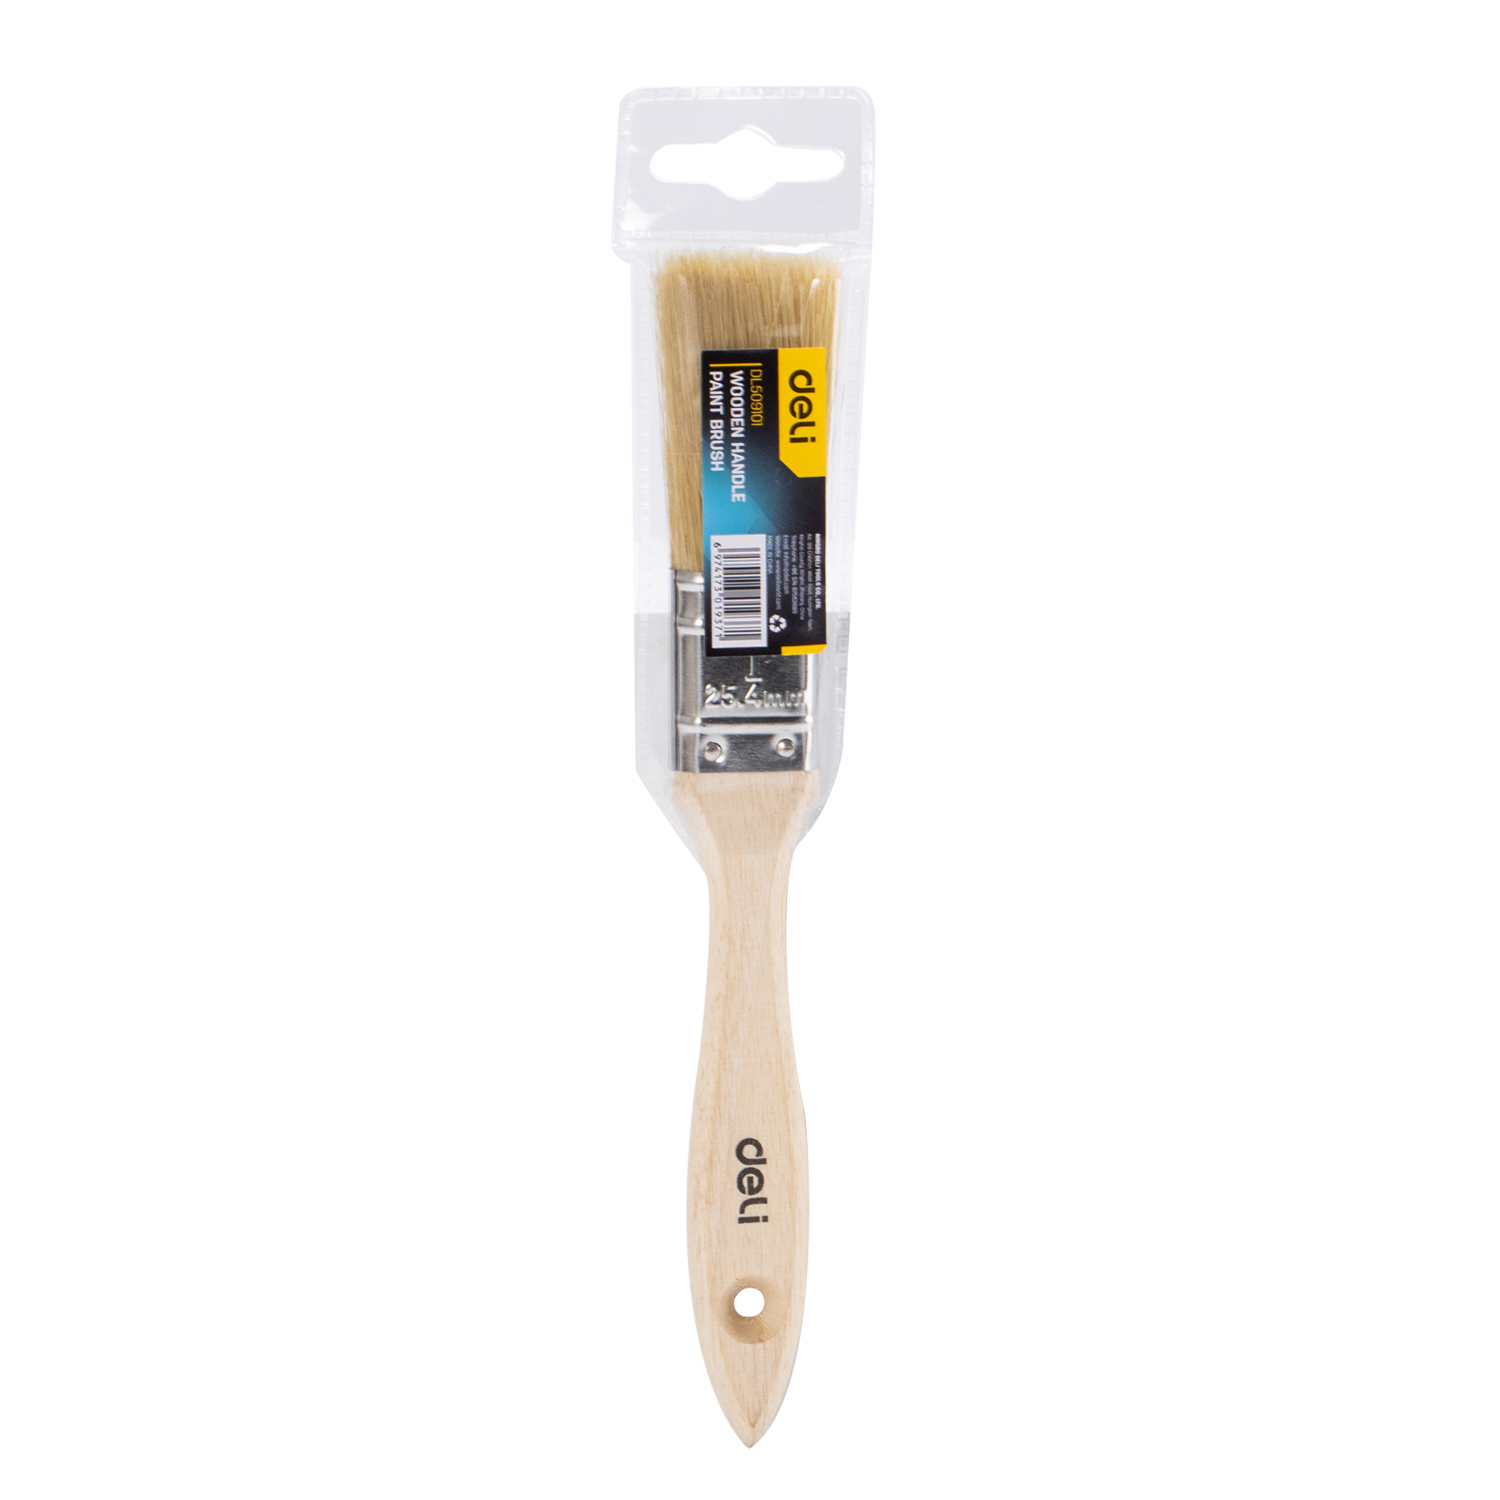 Thicken encryption Paint brush